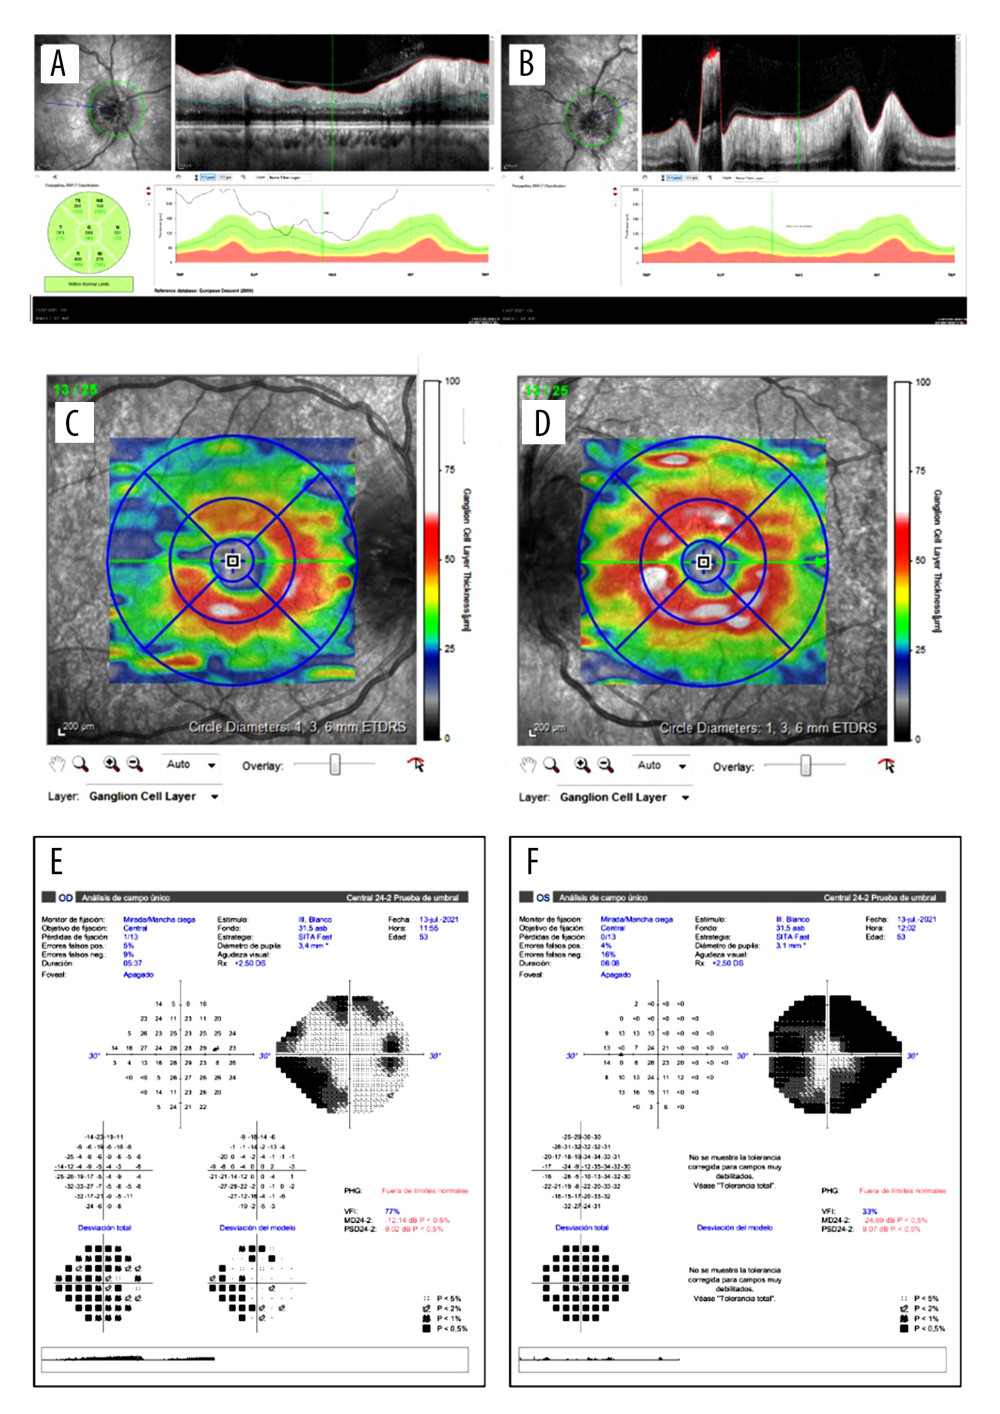 OCT images and their functional correspondence by Humphrey 24-2 visual field. A and B show the retinal nerve fiber layer (RNFL) thickness of the right and left eye, respectively. It was not possible to measure the edema in the left eye at the critical moment. C and D illustrate the ganglion cell layer thickness of the right and left eye, respectively, showing a loss in the superotemporal quadrant of the right eye 3 weeks after the initial symptoms. The left eye remains at normal levels. E and F show the Humphrey 24-2 visual field of the right and the left eye, respectively. The right eye shows a lower nasal scotoma, while the left eye shows a constriction of the visual field.